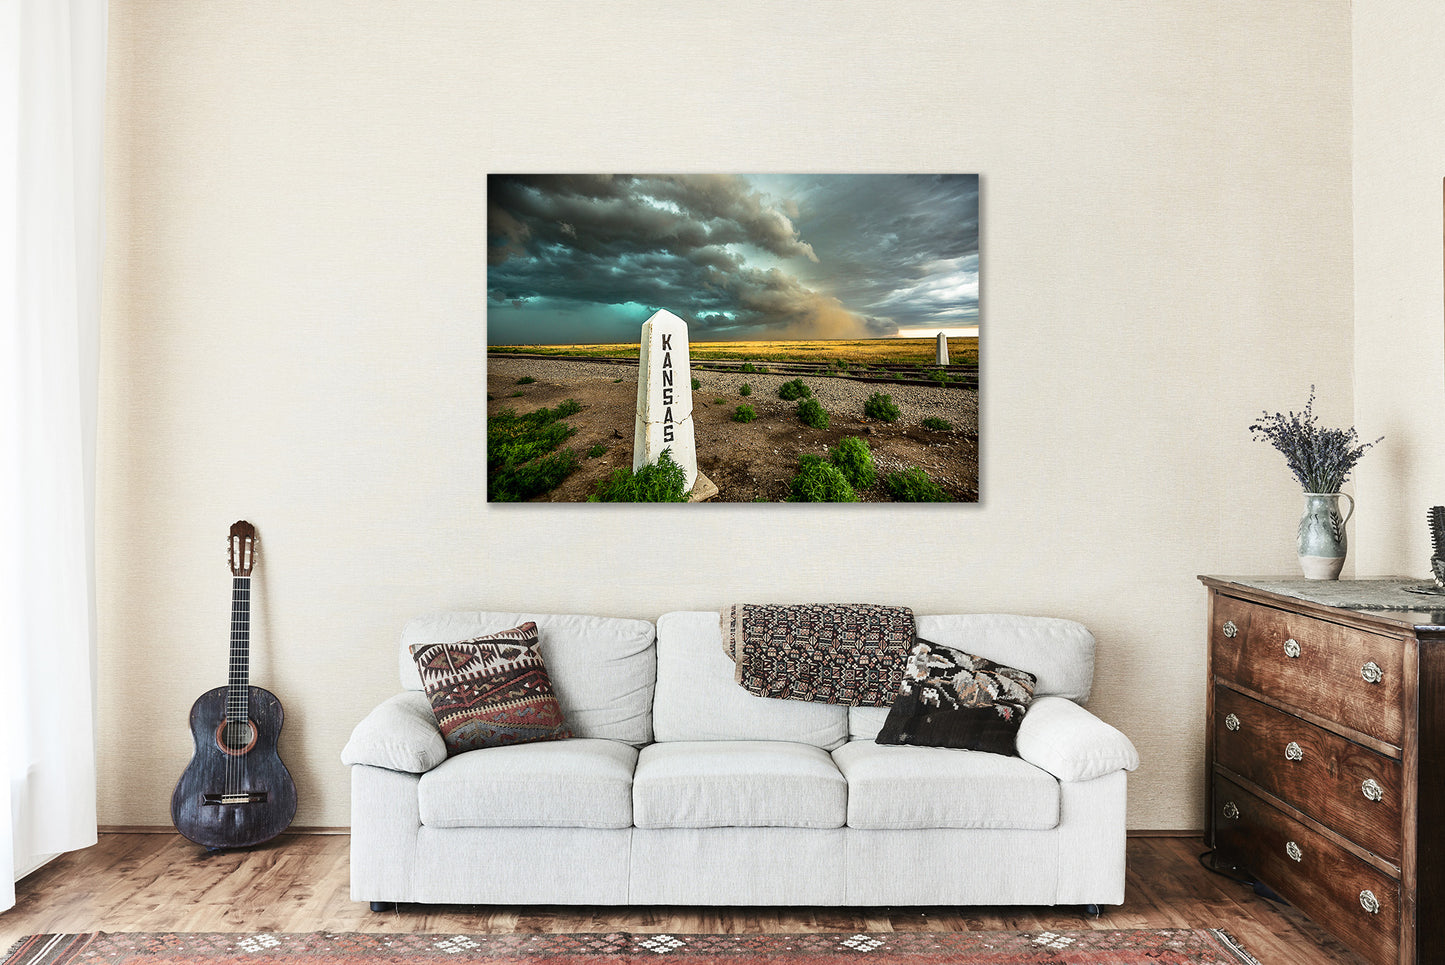 Great Plains Canvas Wall Art (Ready to Hang) Gallery Wrap of Thunderstorm Advancing Past Railroad Post at Kansas and Colorado State Line Storm Photography Western Decor